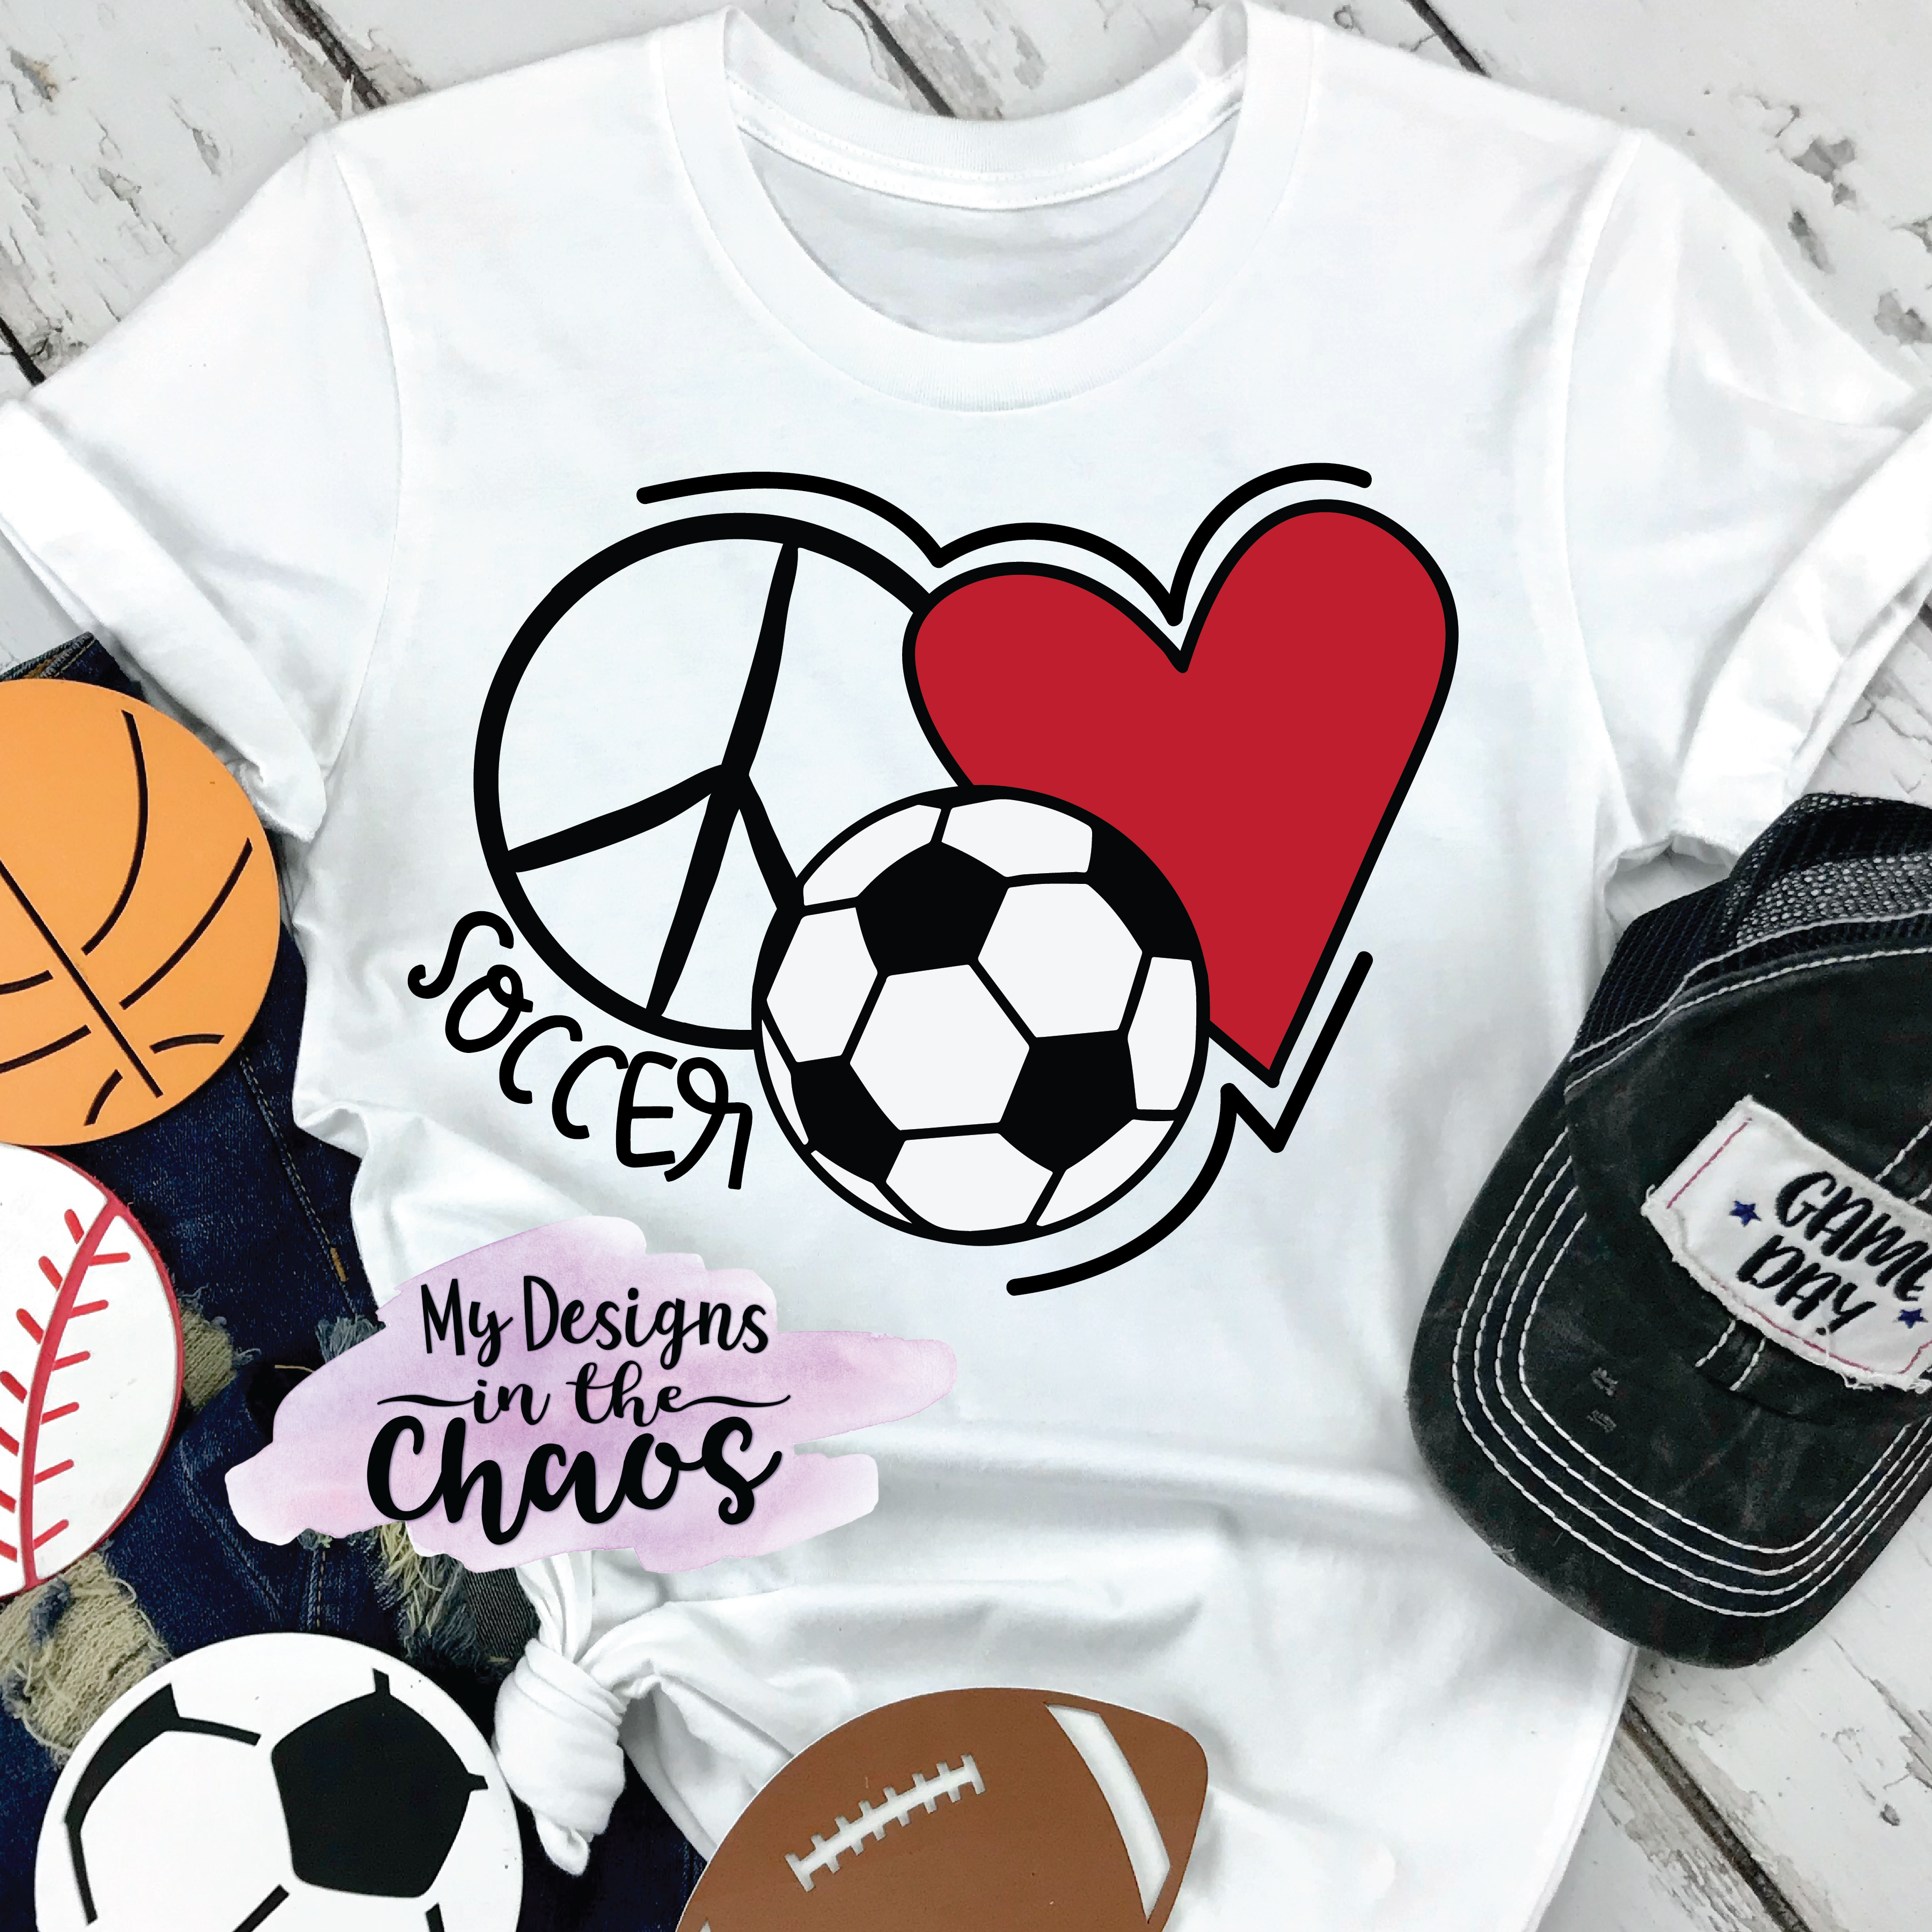 Download Peace Love and Soccer - My Designs In the Chaos